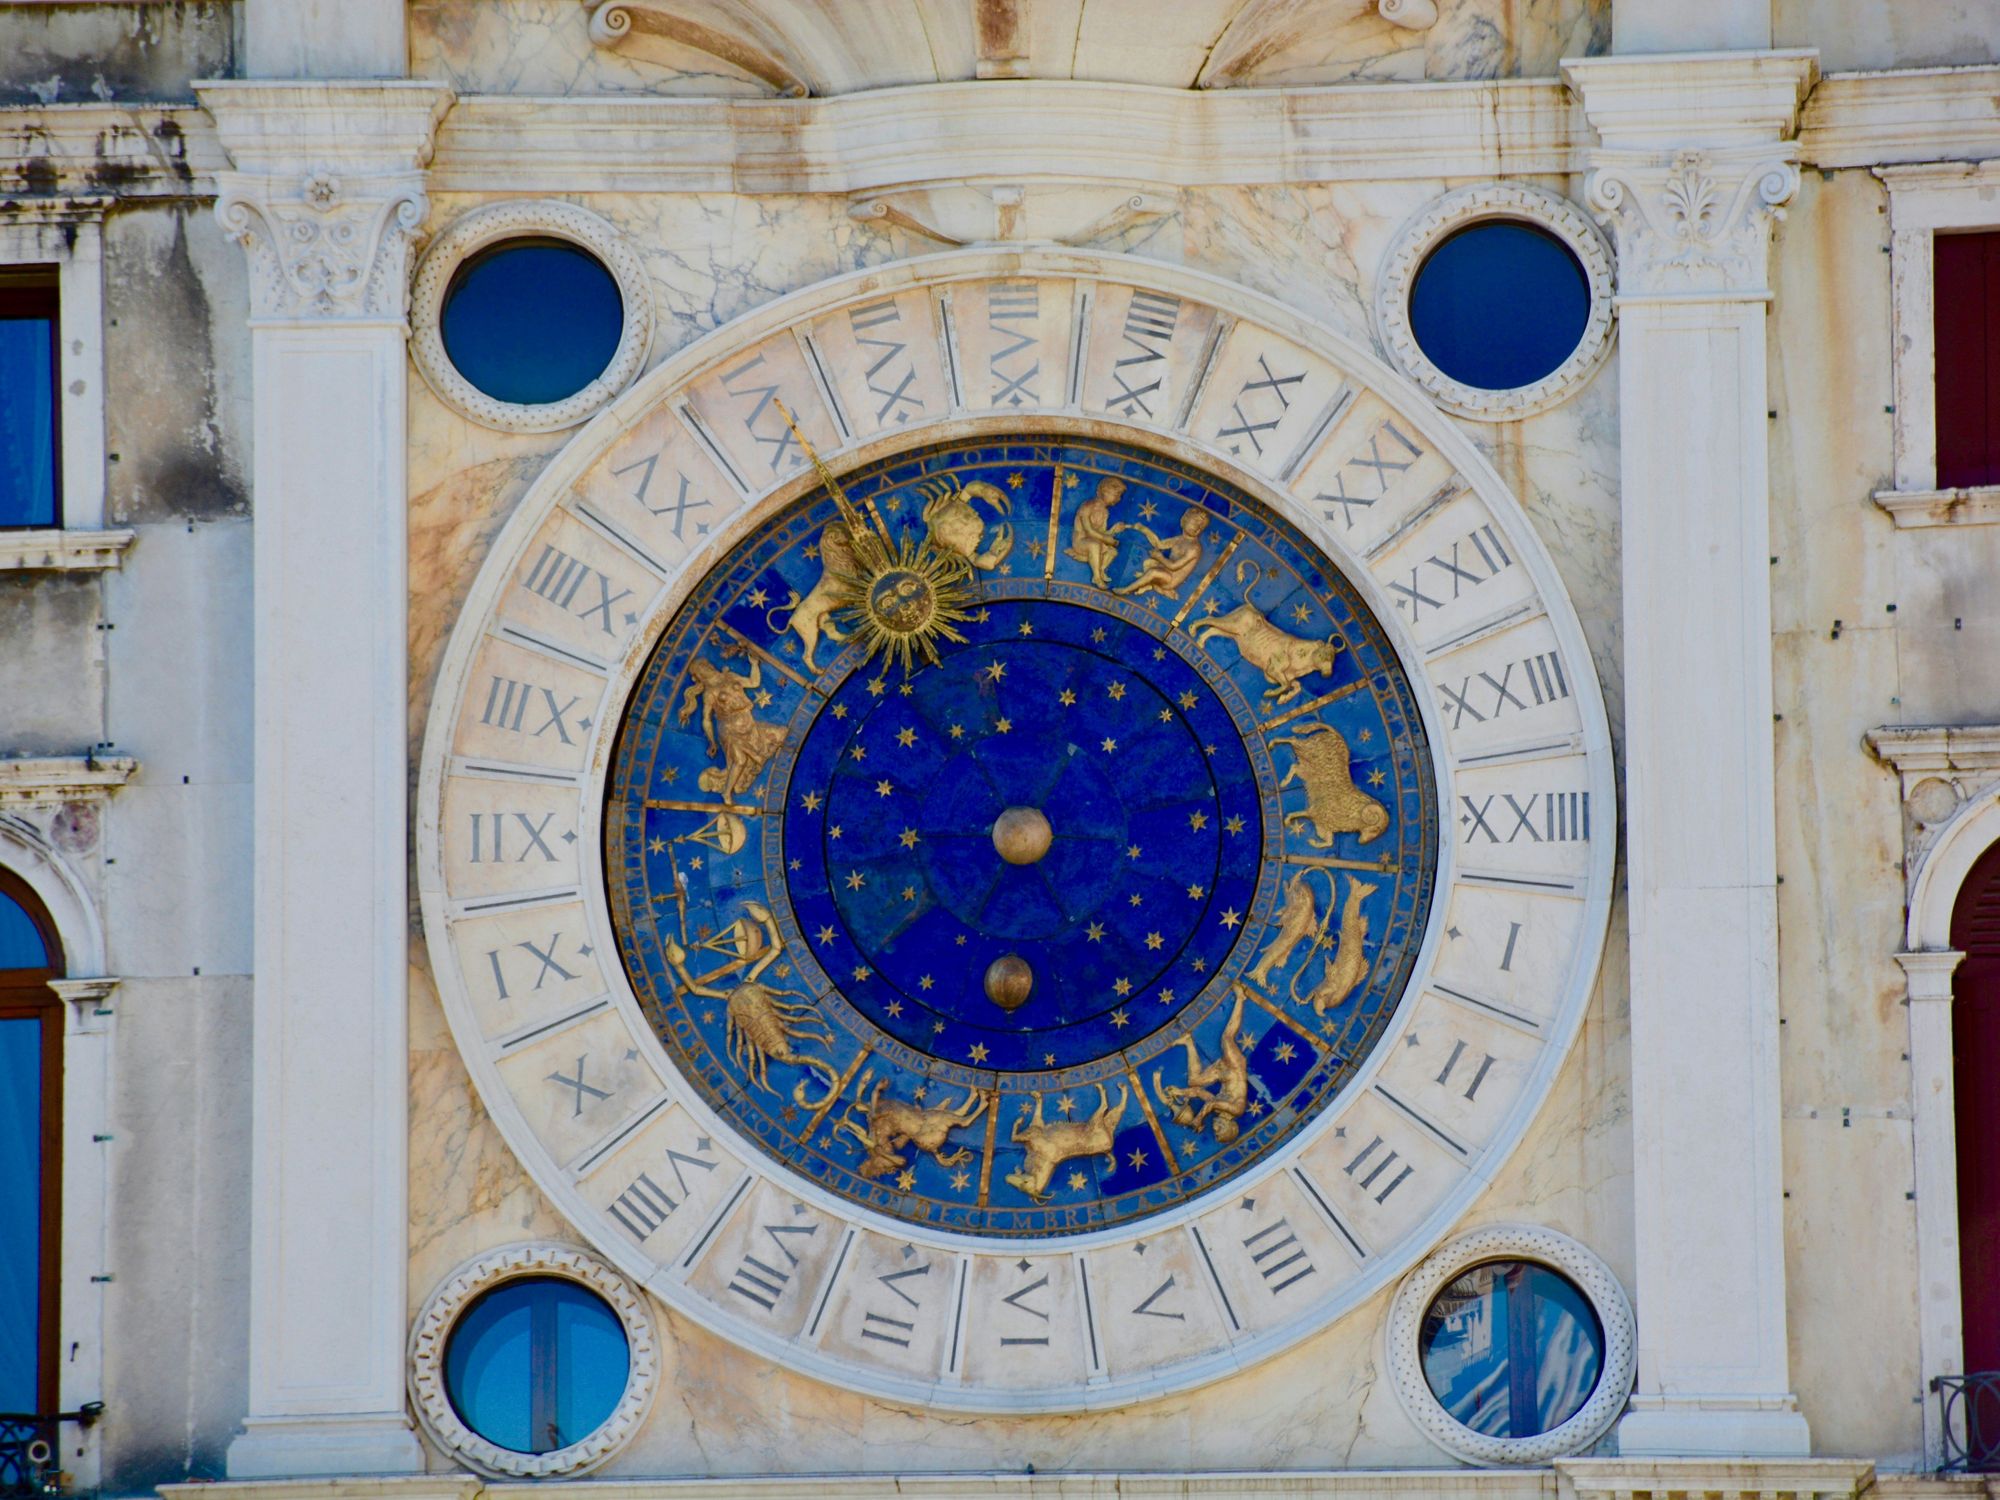 Sculpture on building facade showing zodiac clock with signs and astrological houses.